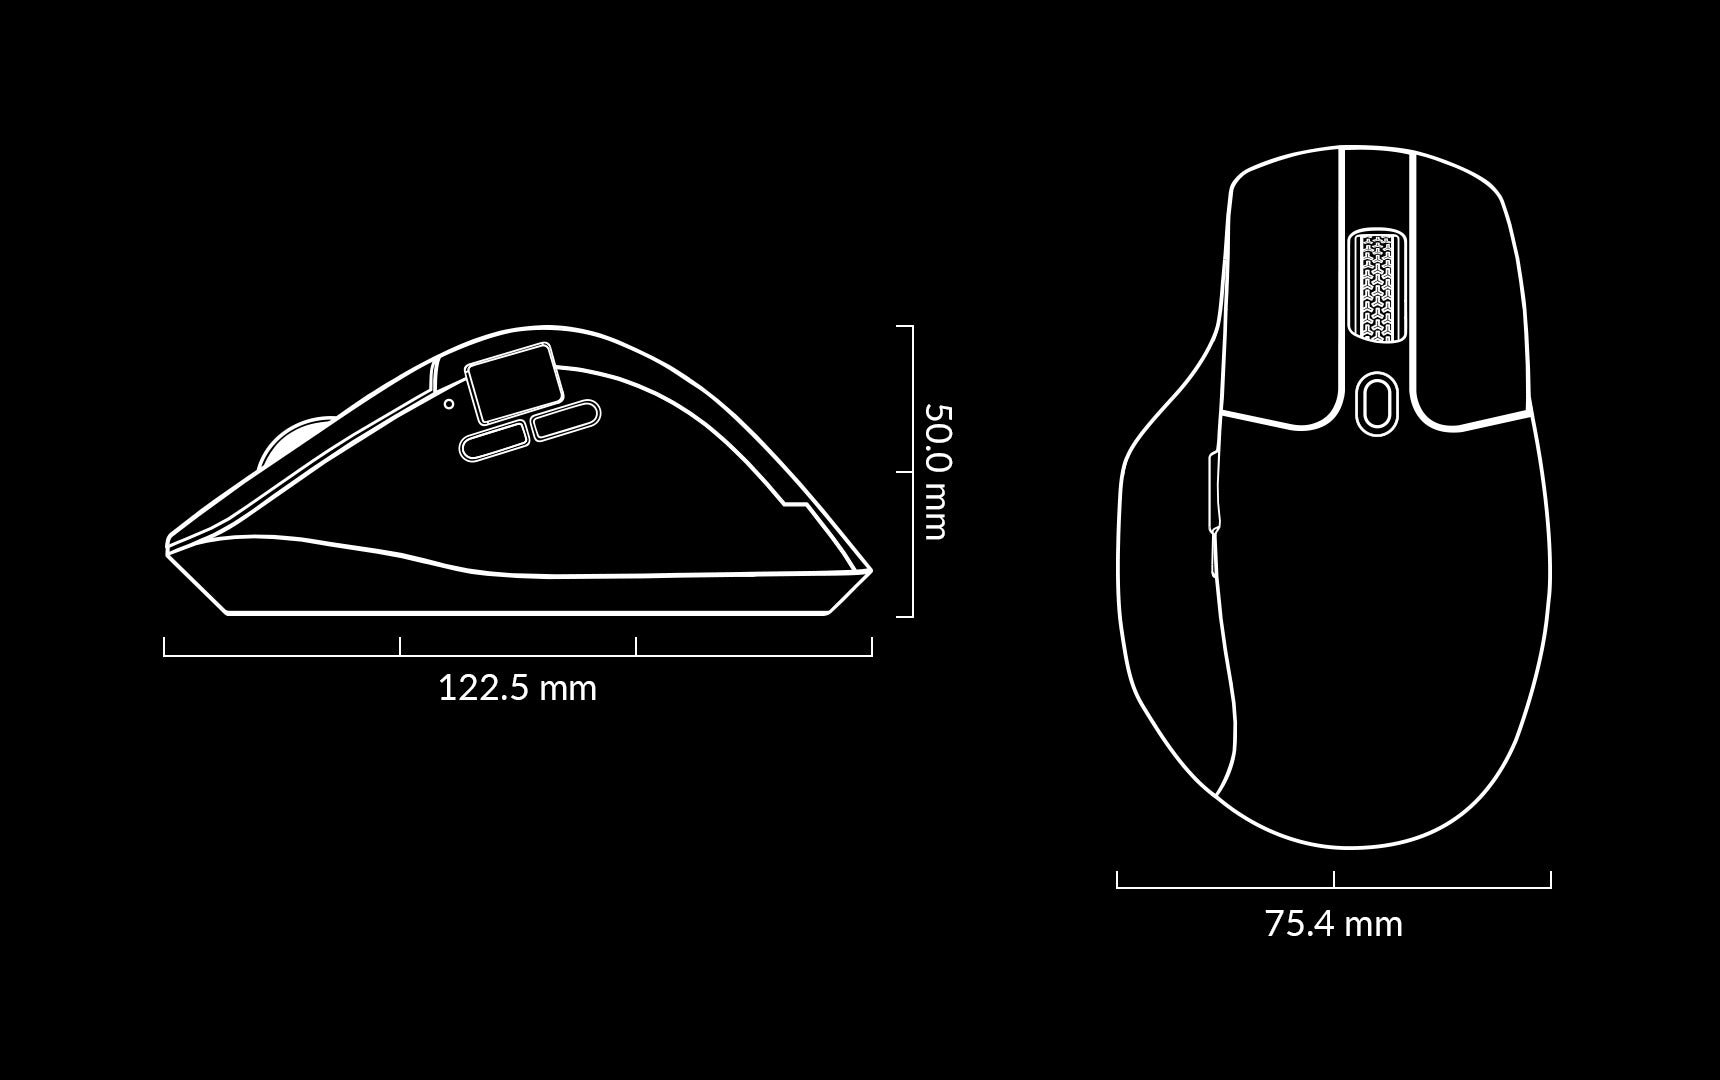 Size of the Keychron M6 wireless mouse